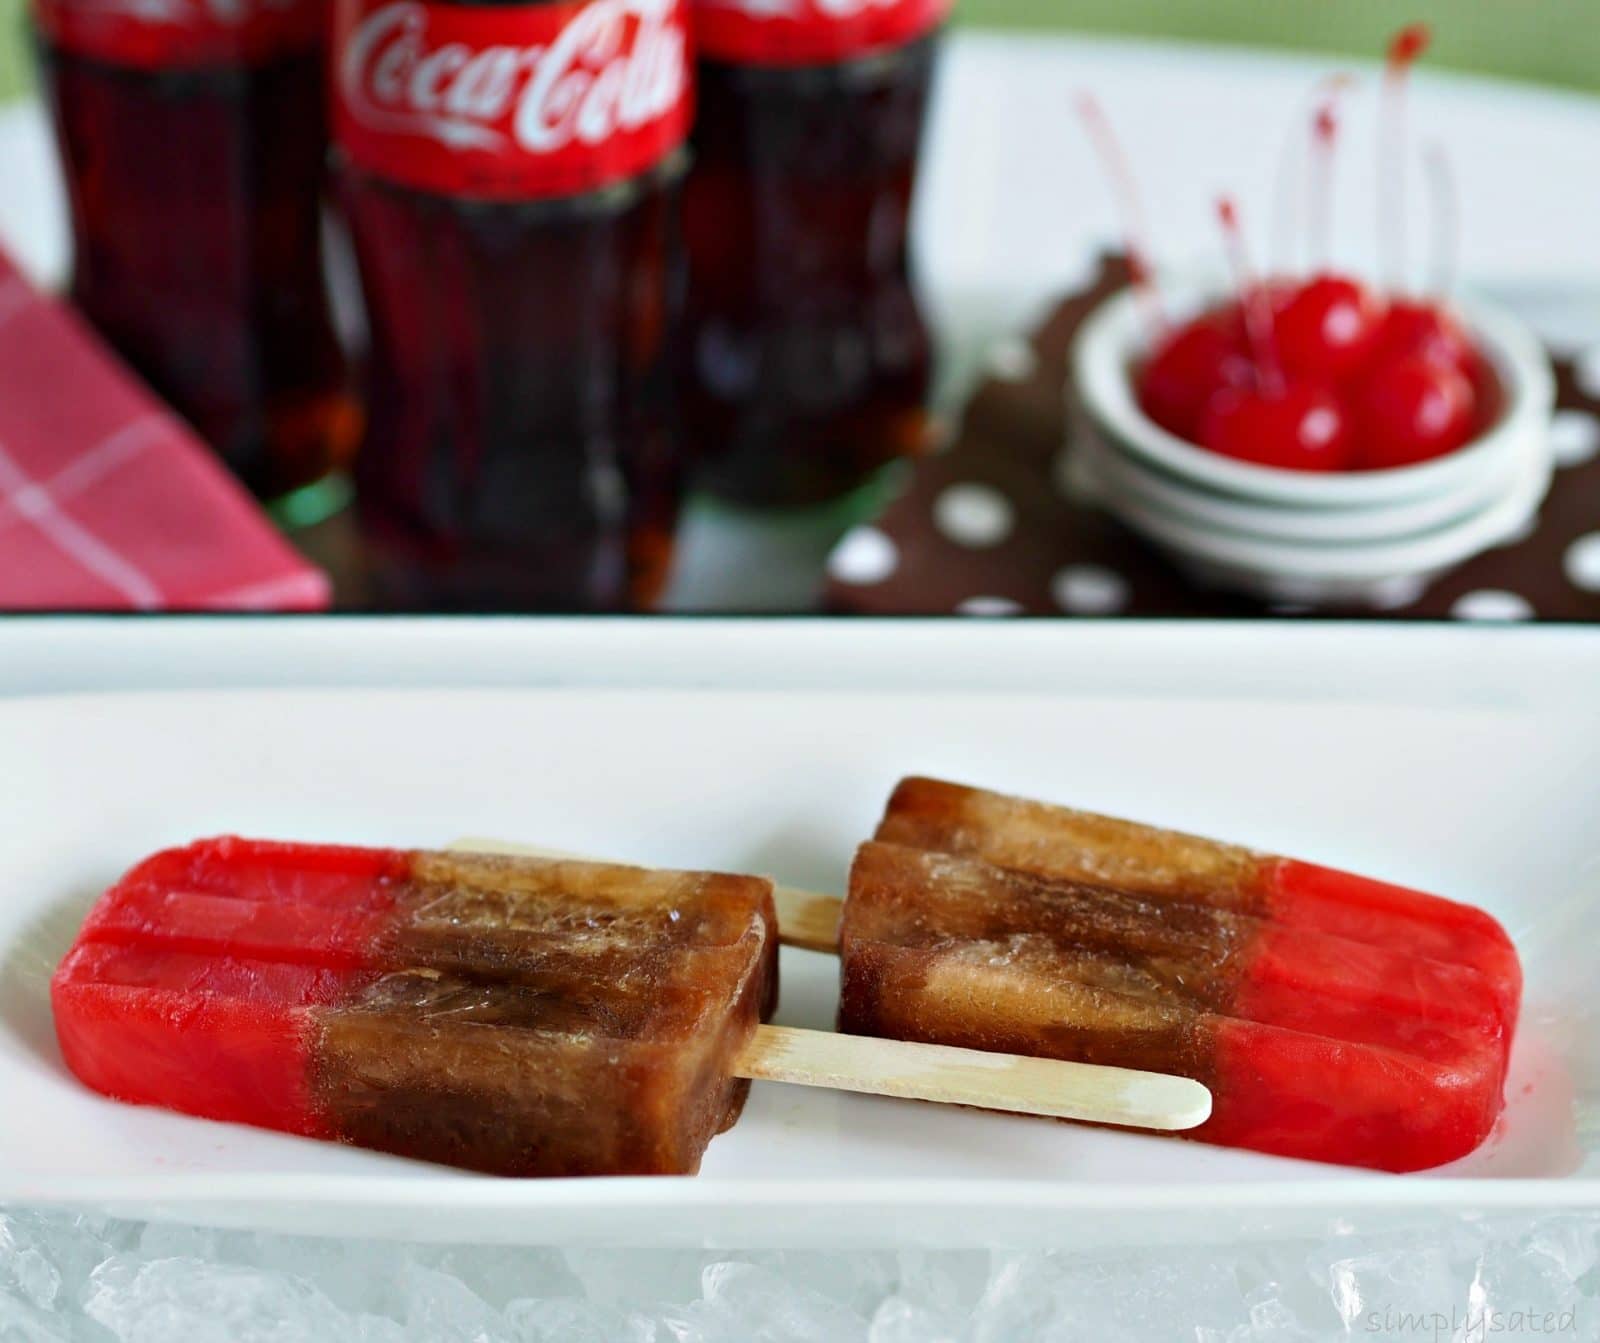 Cherry Coke Popsicles are a fun take on the real thing. www.simplysated.com